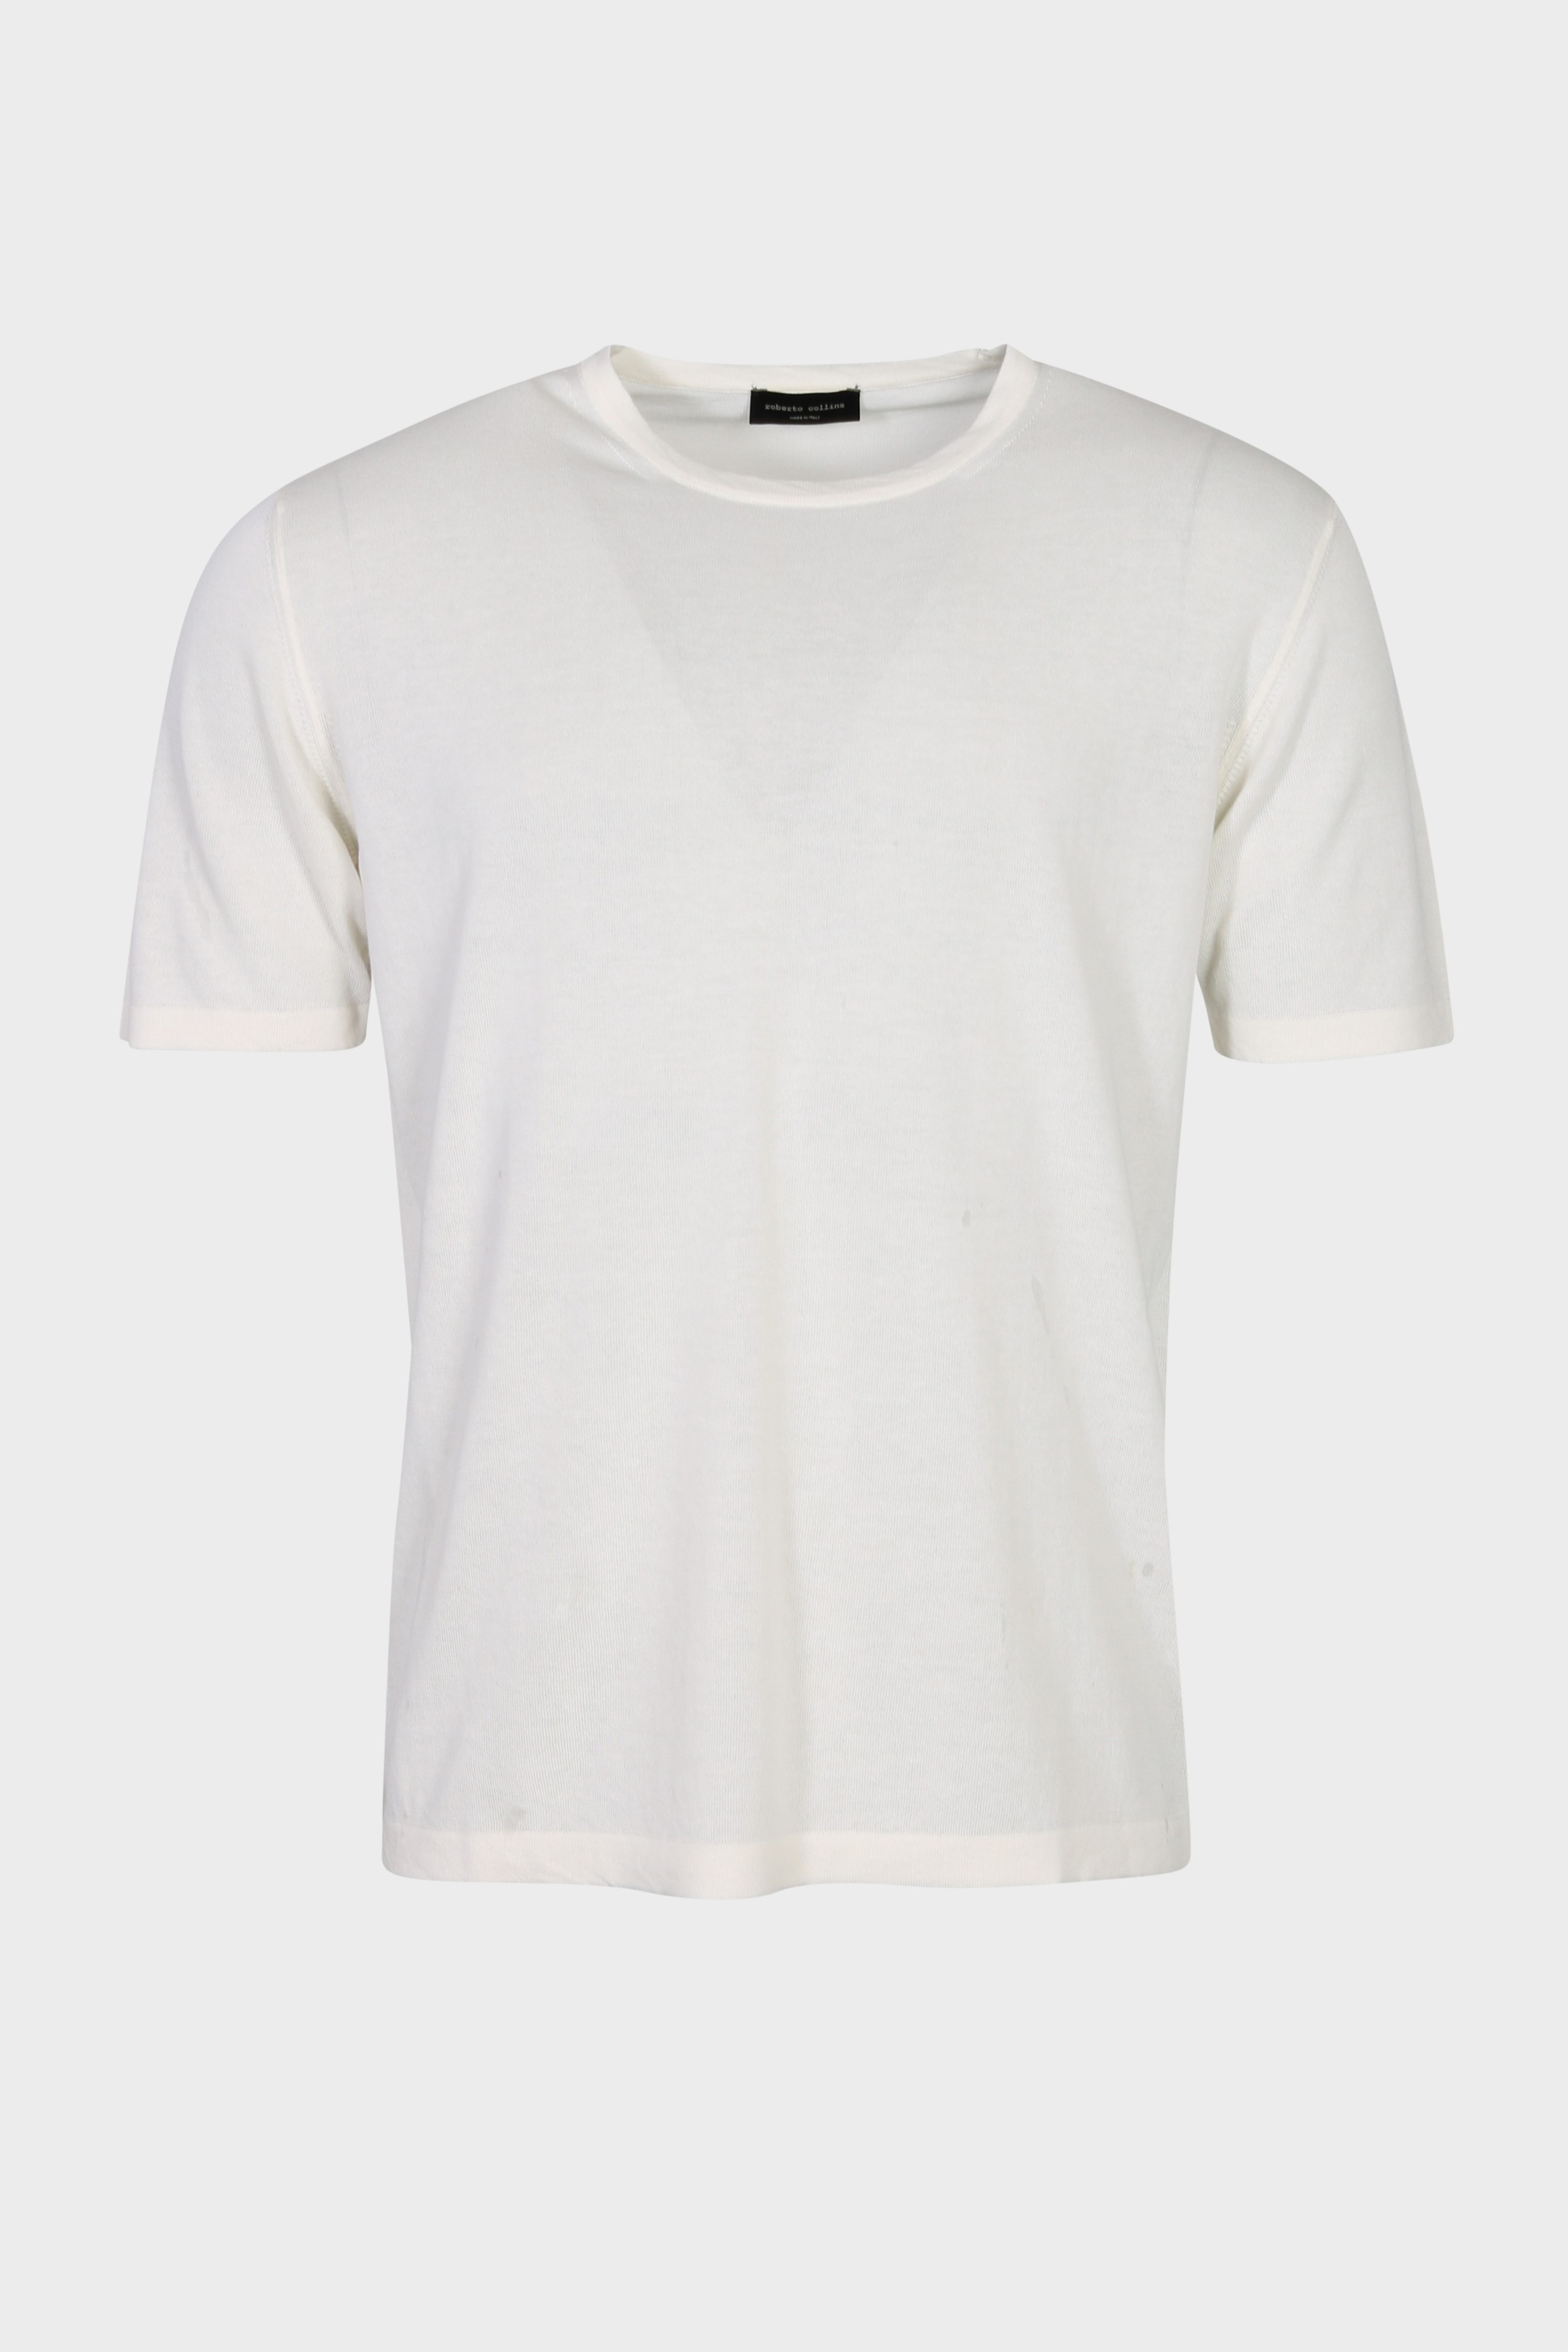 ROBERTO COLLINA Cotton Knit T-Shirt in Offwhite 48